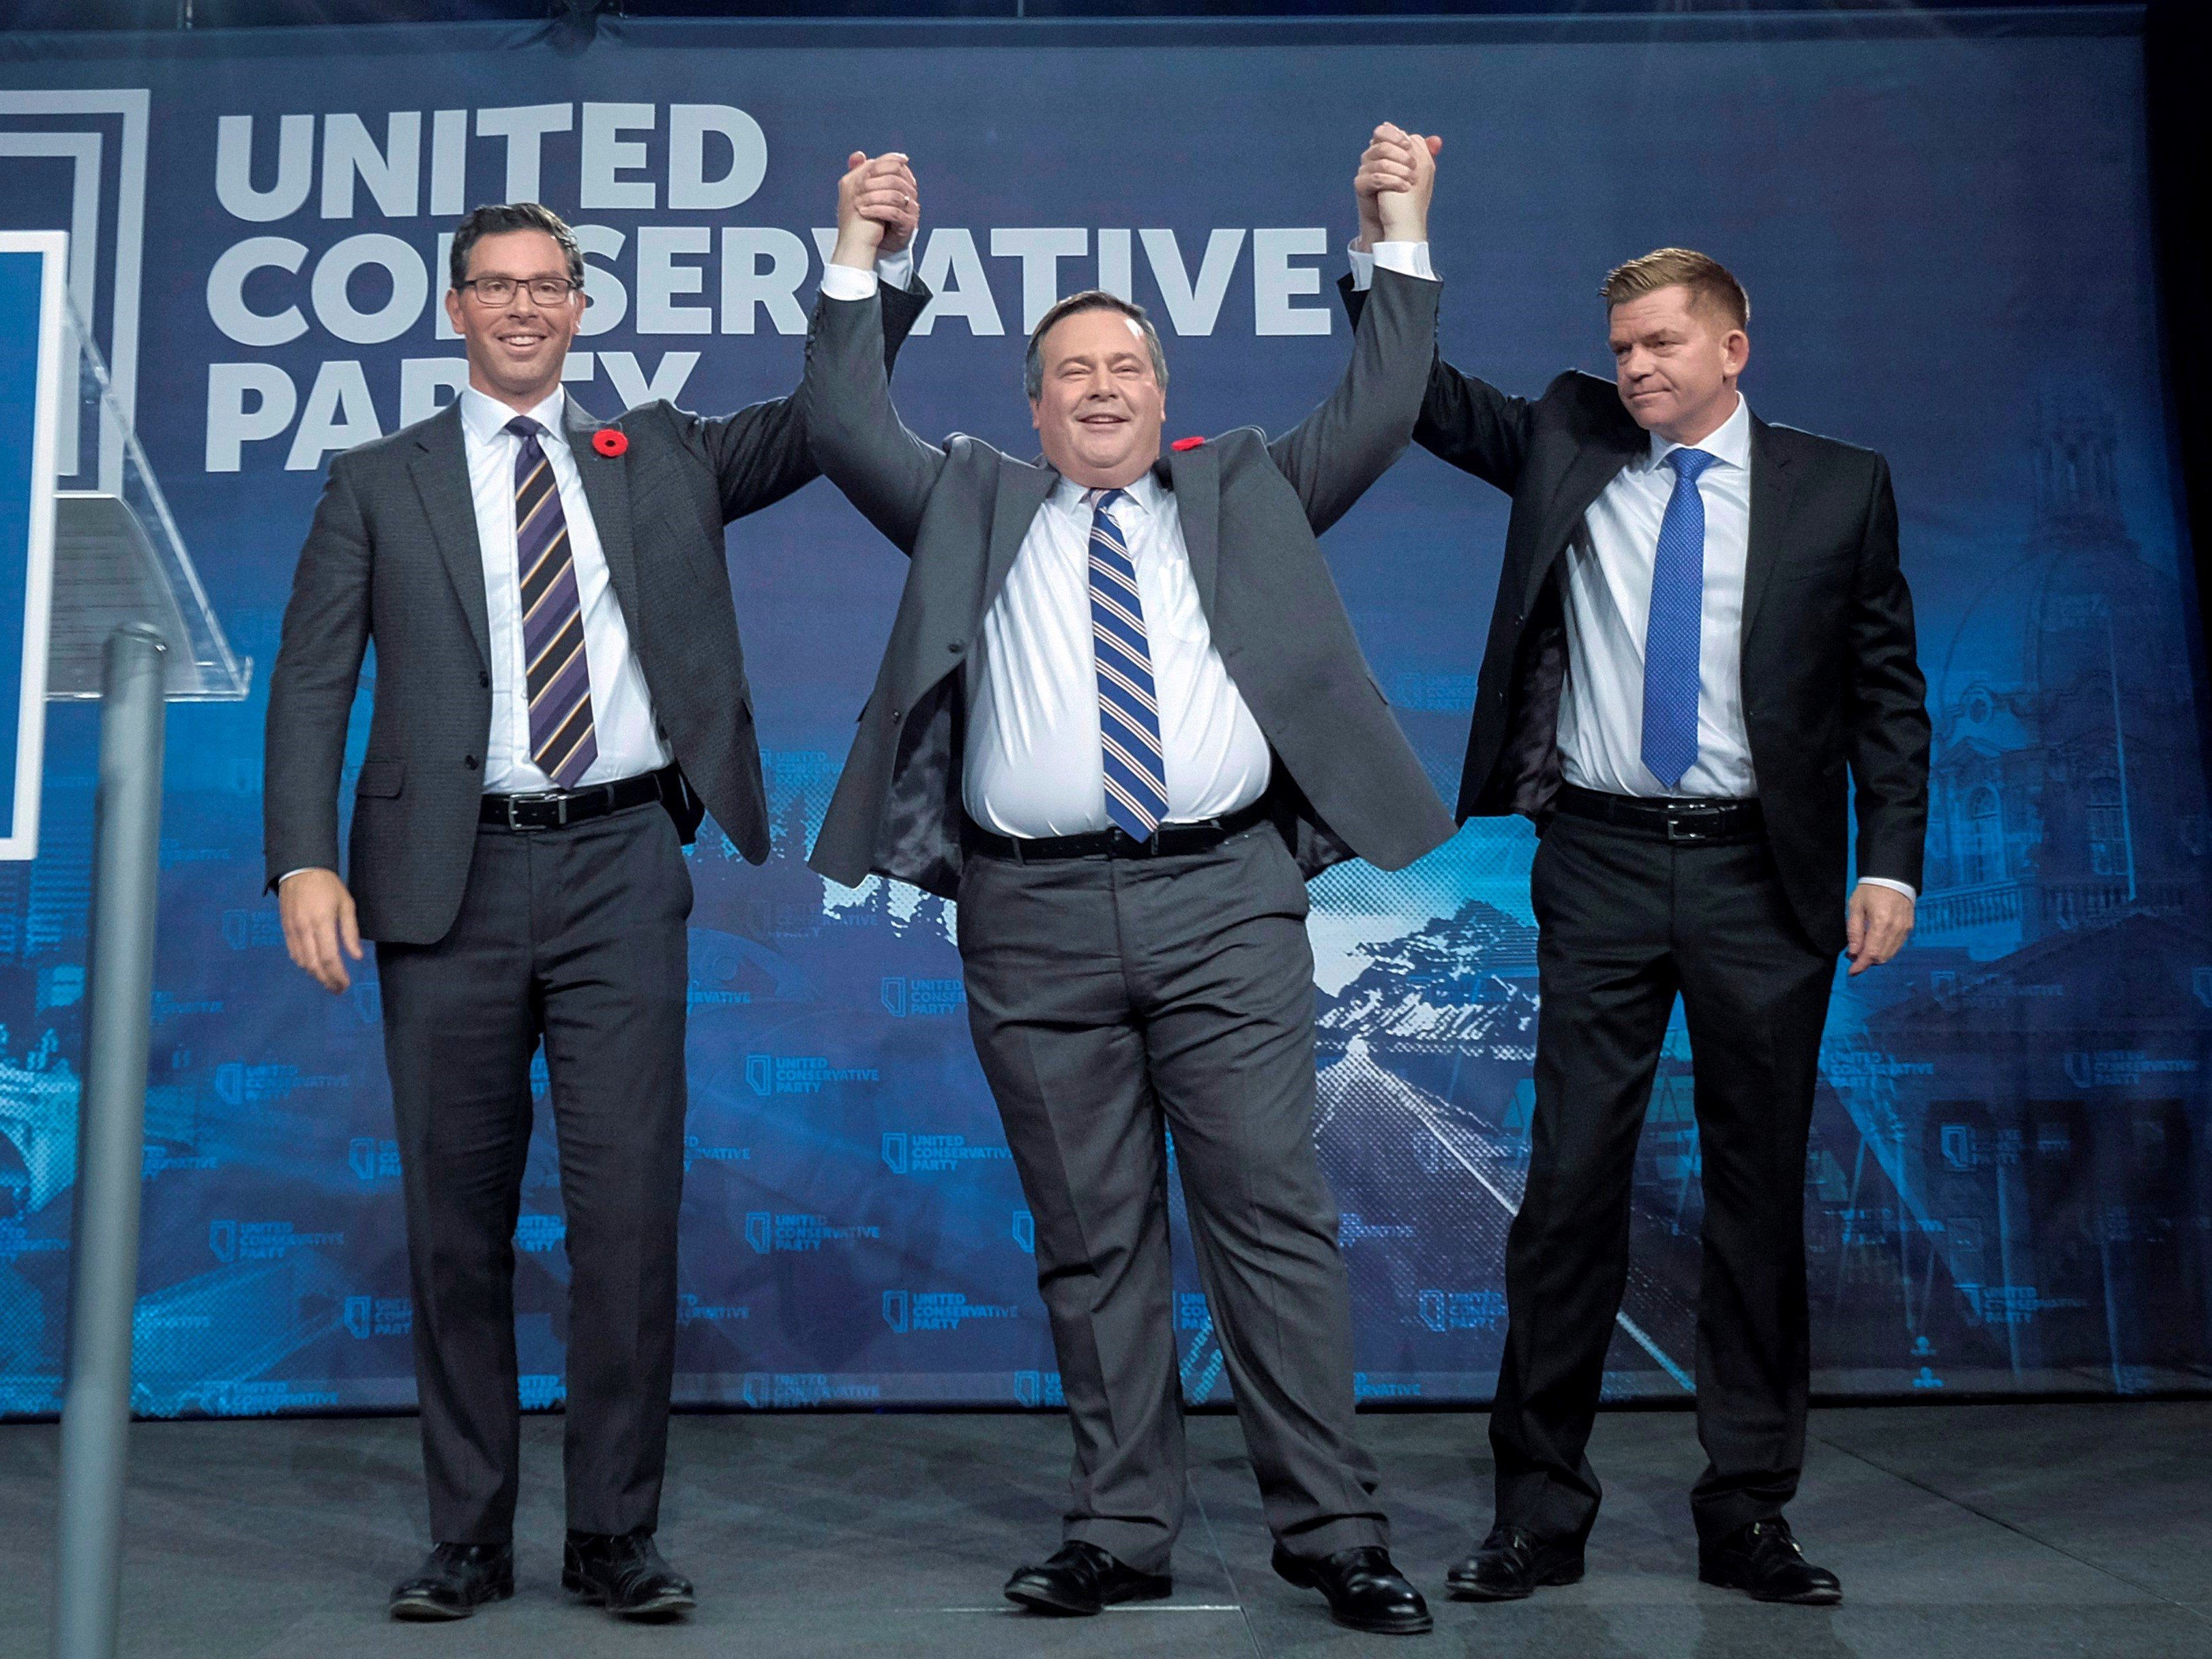 Three men stand on a stage wearing suits and ties. They are holding hands, with their hands in the air triumphantly. 